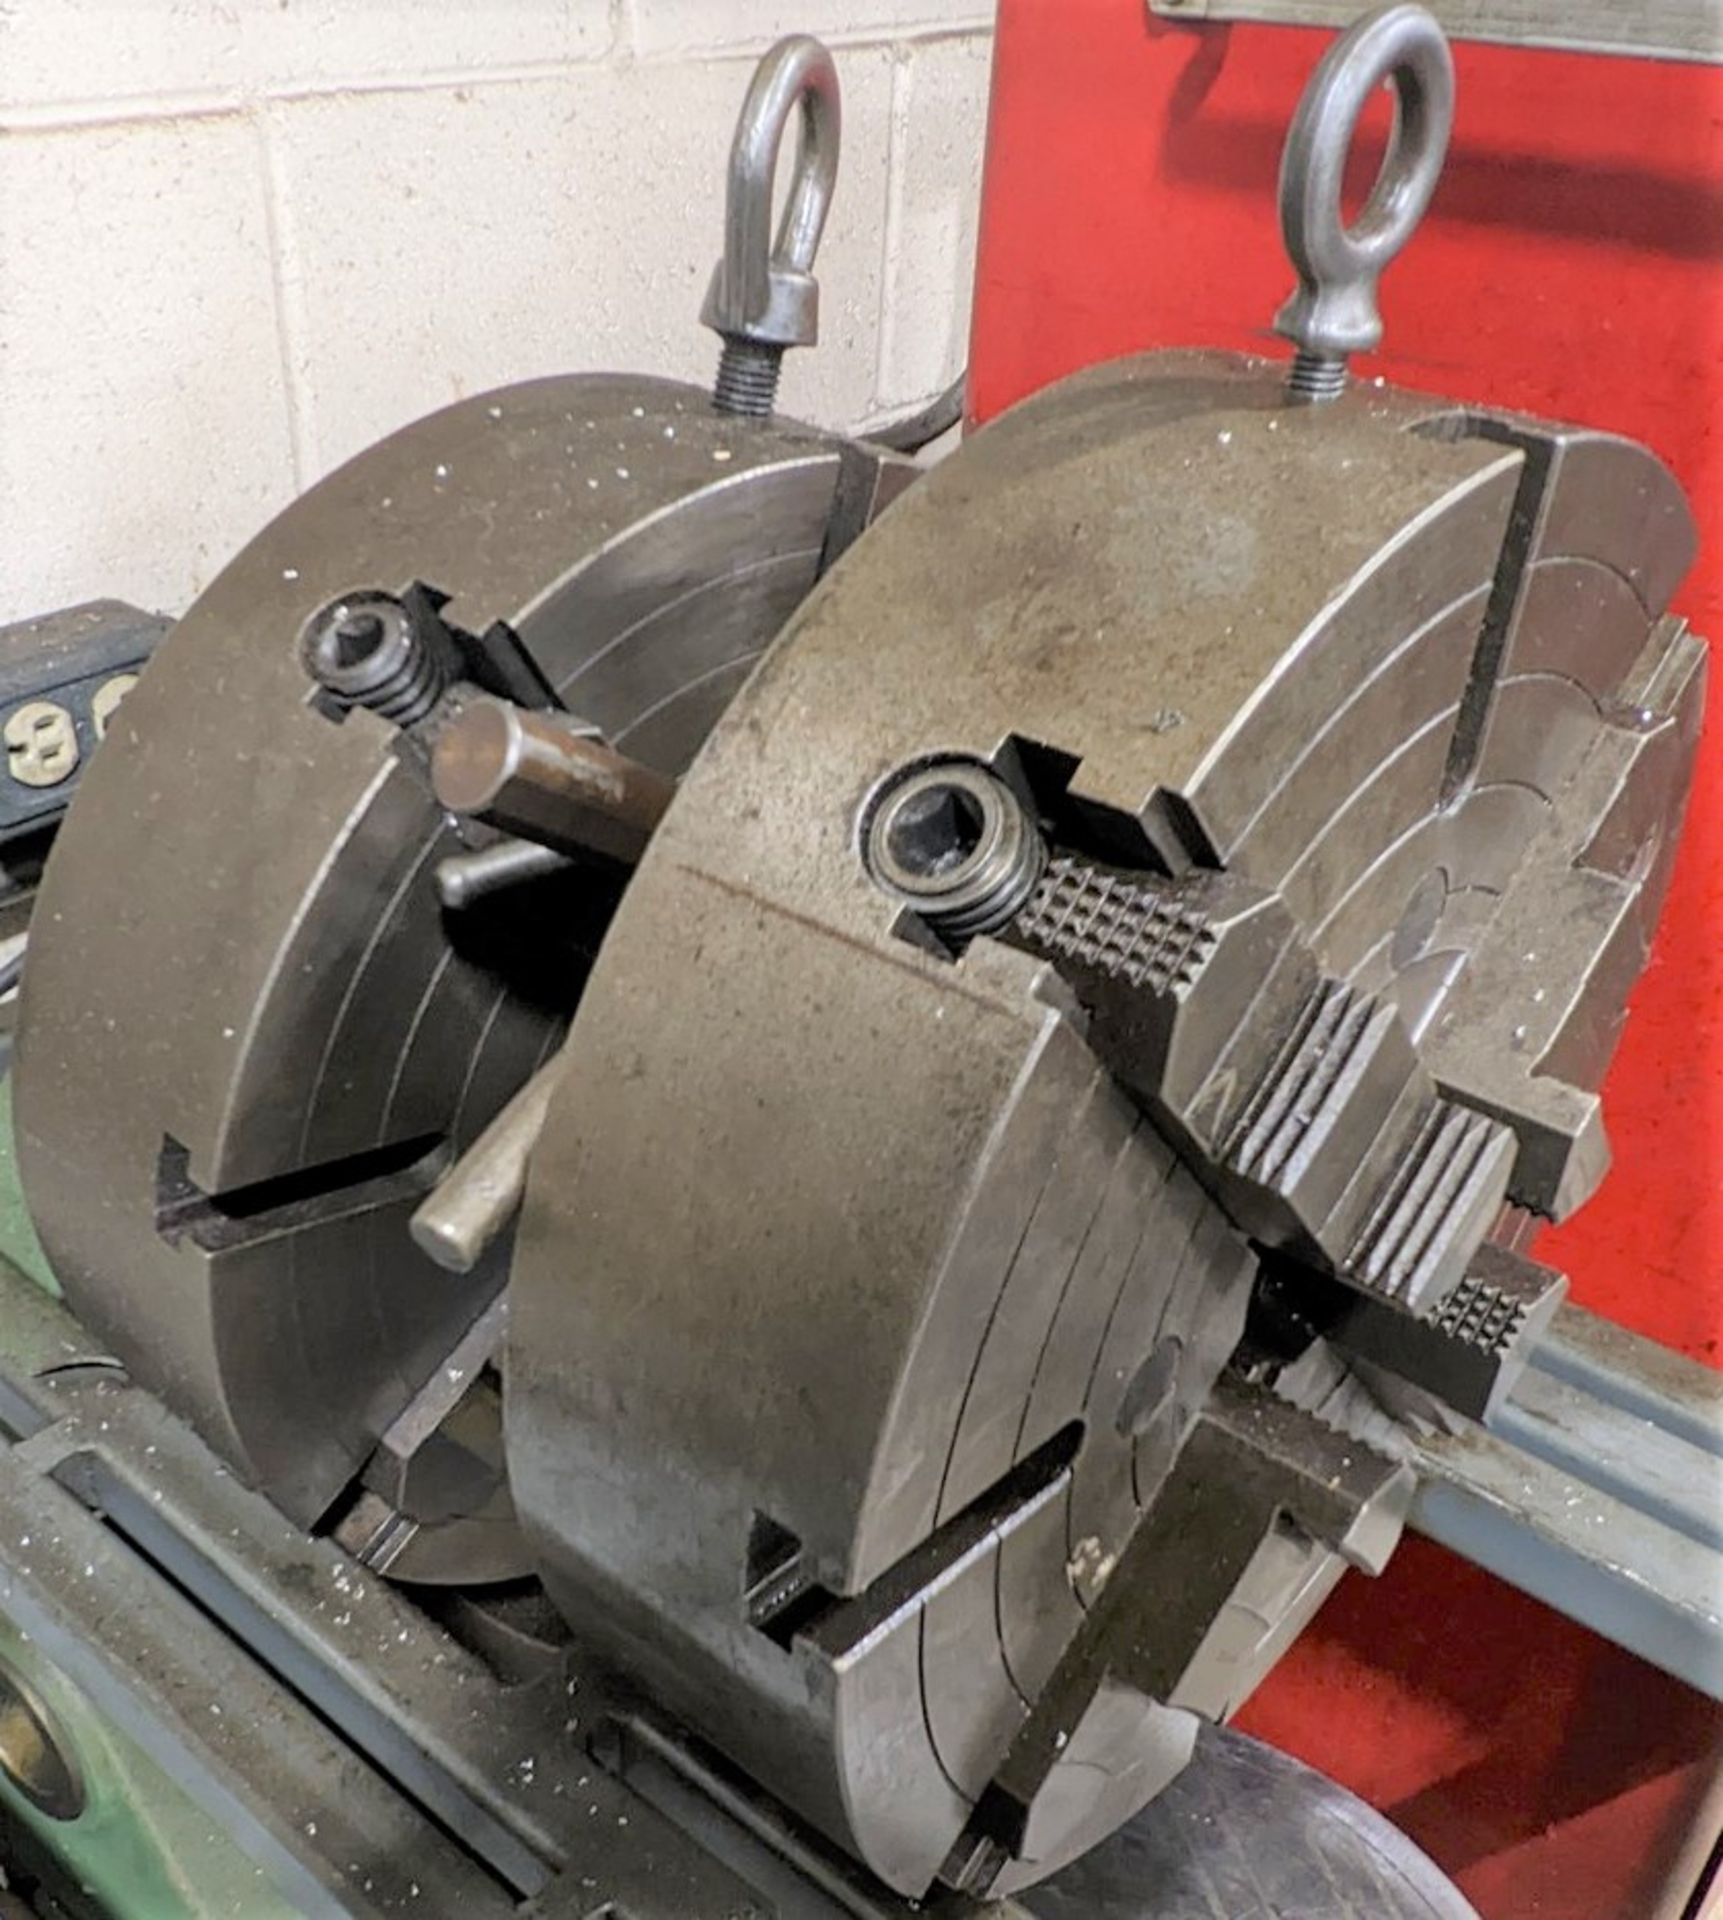 VDF BOEHRINGER GOPPINGEN LATHE, ACU-RITE 2-AXIS DRO, 10” 3-JAW CHUCK, 22” SWING, 60” BED, TOOL POST, - Image 10 of 24